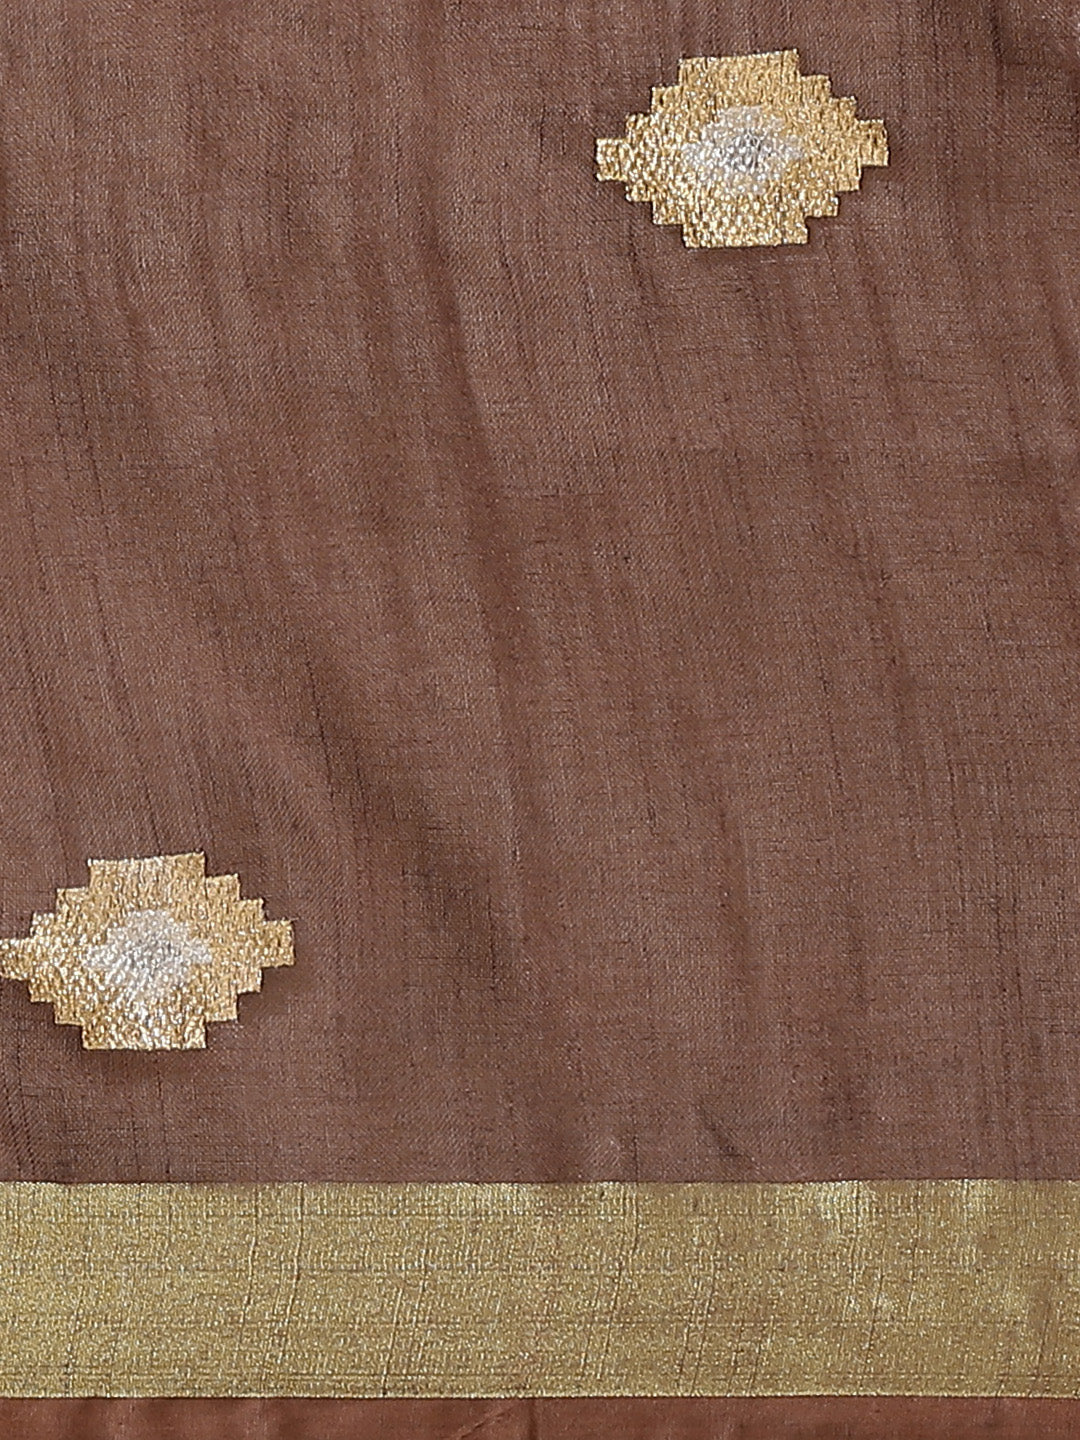 Brown and Tan, Kalakari India Linen Handwoven Saree and Blouse ALBGSA0084-Saree-Kalakari India-ALBGSA0084-Cotton, Geographical Indication, Hand Crafted, Heritage Prints, Linen, Natural Dyes, Red, Sarees, Shibori, Sustainable Fabrics, Woven, Yellow-[Linen,Ethnic,wear,Fashionista,Handloom,Handicraft,Indigo,blockprint,block,print,Cotton,Chanderi,Blue, latest,classy,party,bollywood,trendy,summer,style,traditional,formal,elegant,unique,style,hand,block,print, dabu,booti,gift,present,glamorous,afforda